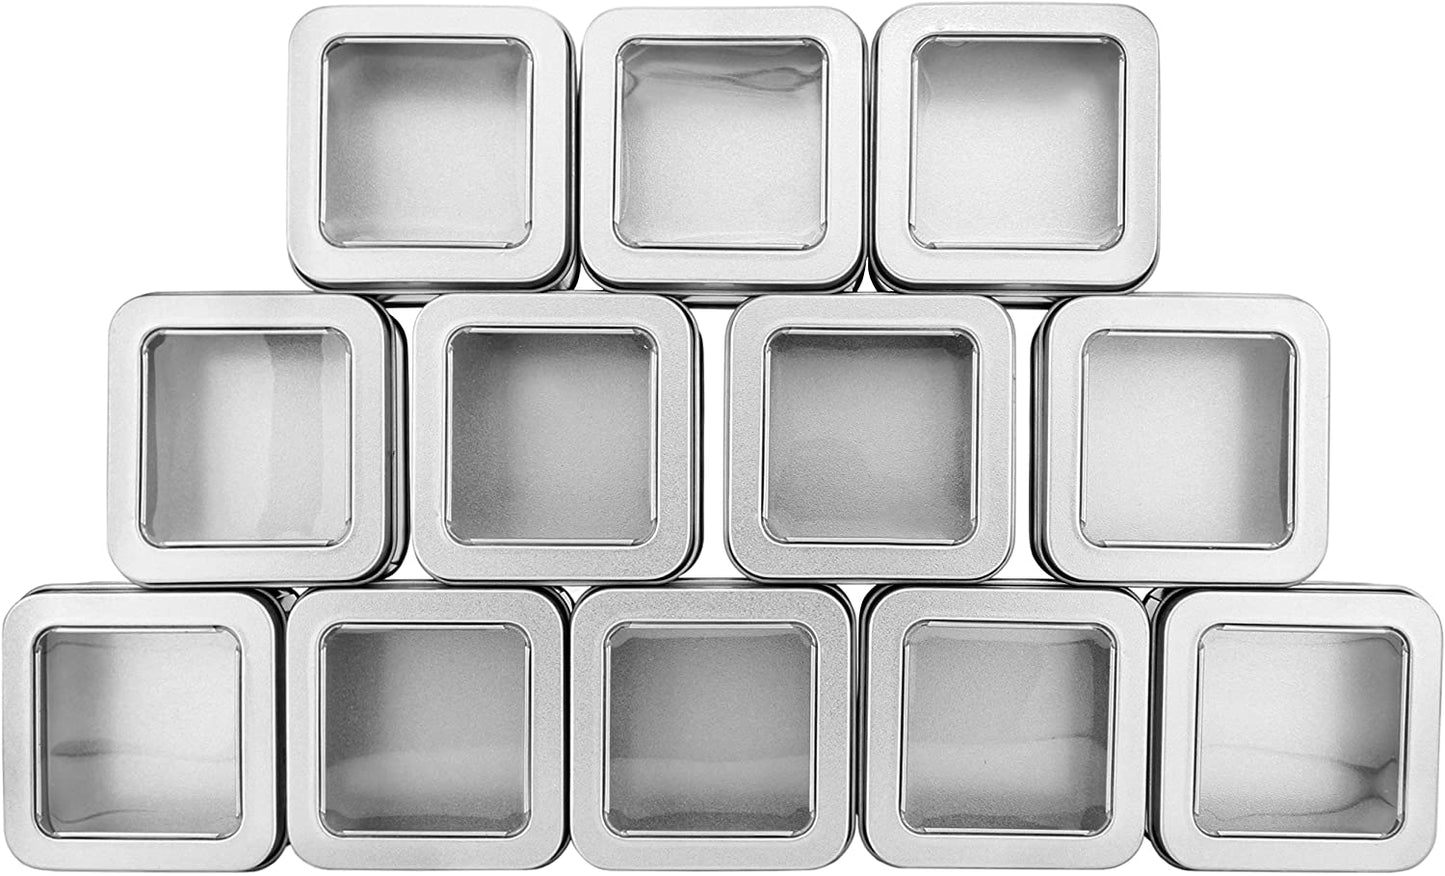 Square Silver Metal Tins w/View Window (12-Pack)